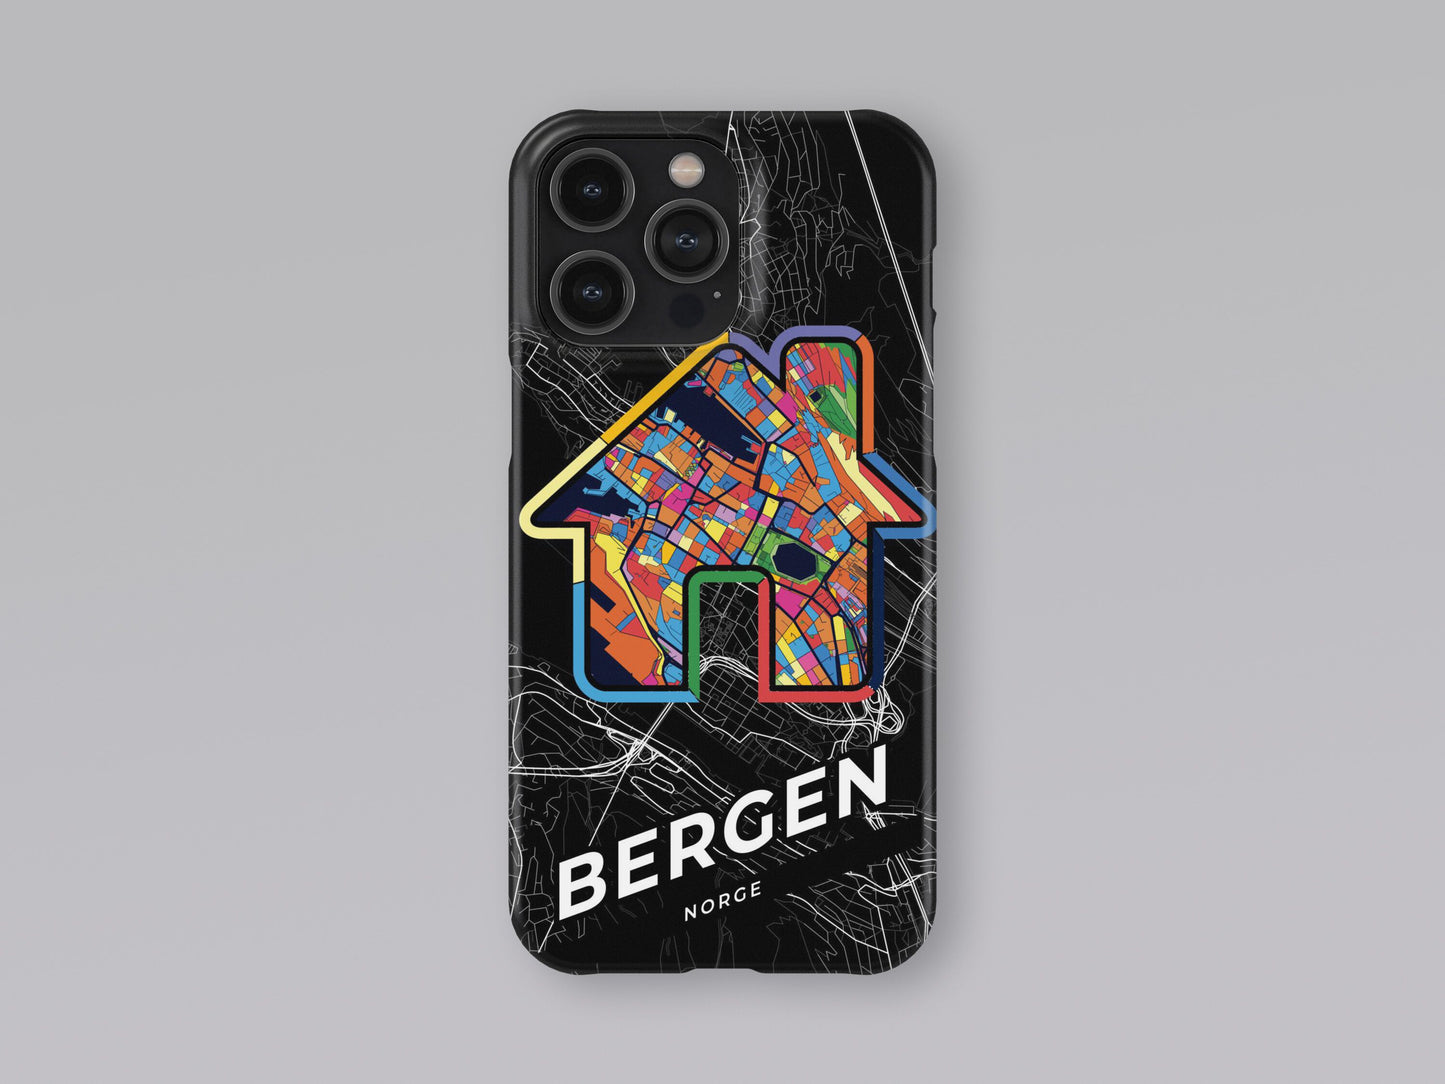 Bergen Norway slim phone case with colorful icon. Birthday, wedding or housewarming gift. Couple match cases. 3